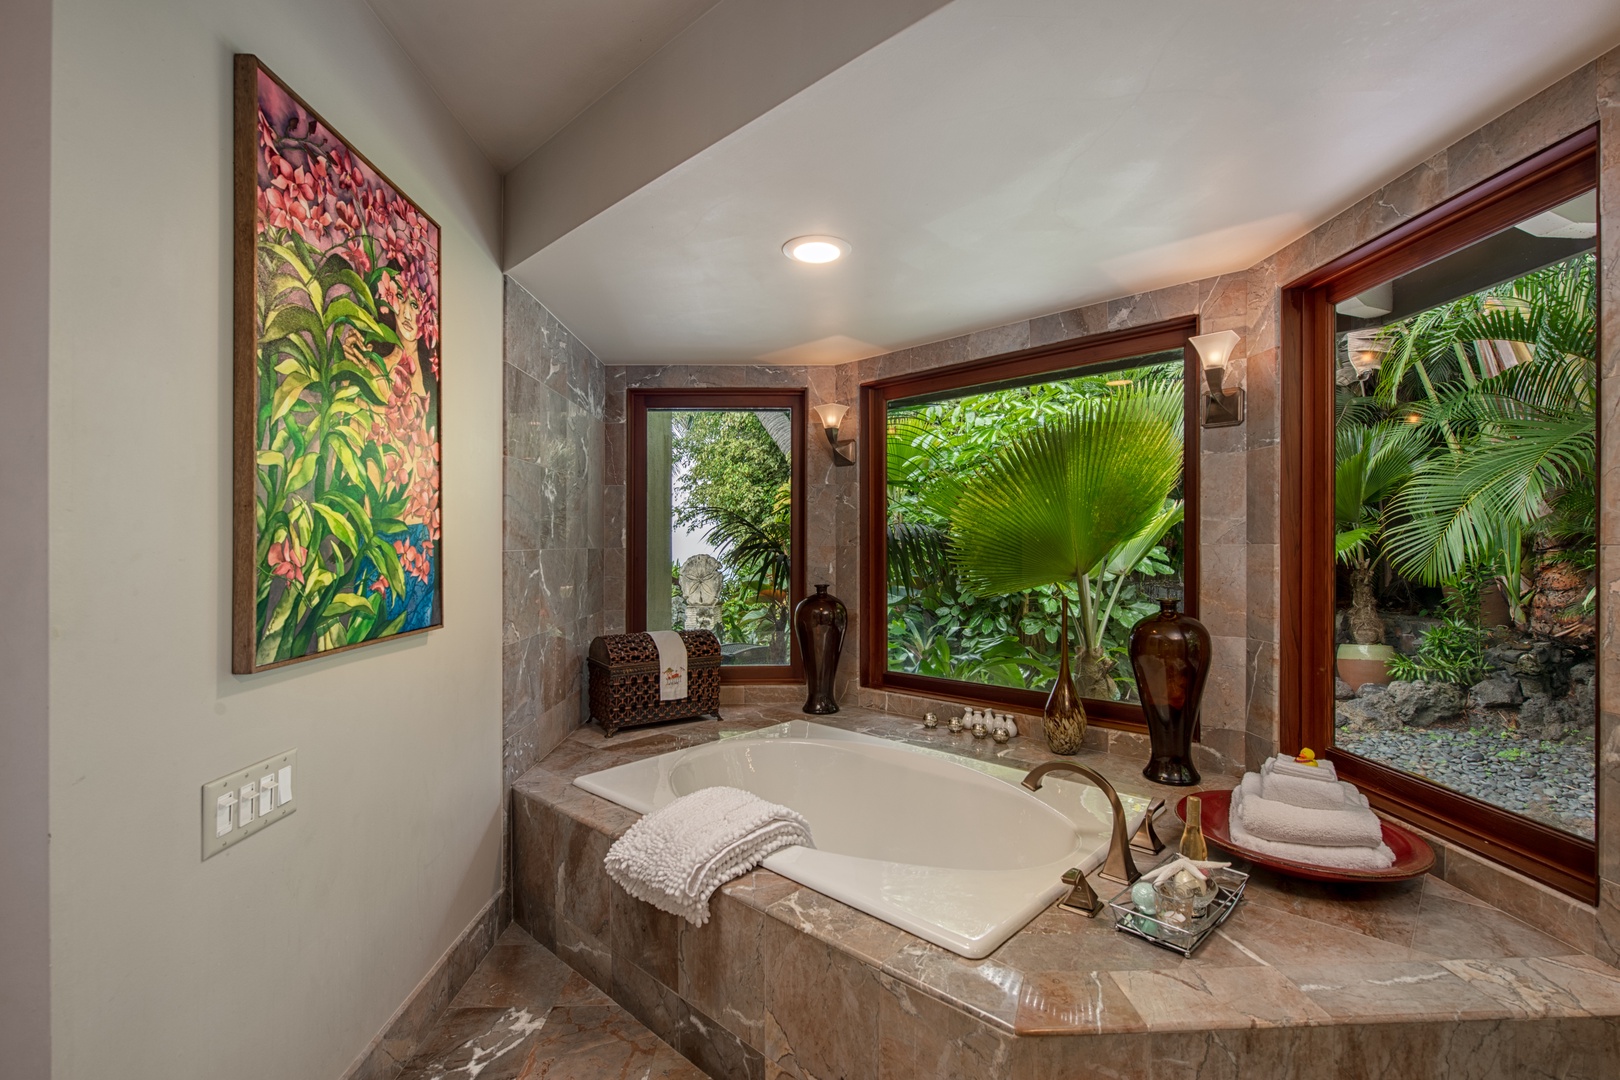 Kailua Kona Vacation Rentals, Hale Wailele** - Primary ensuite with soaker tub and natural light